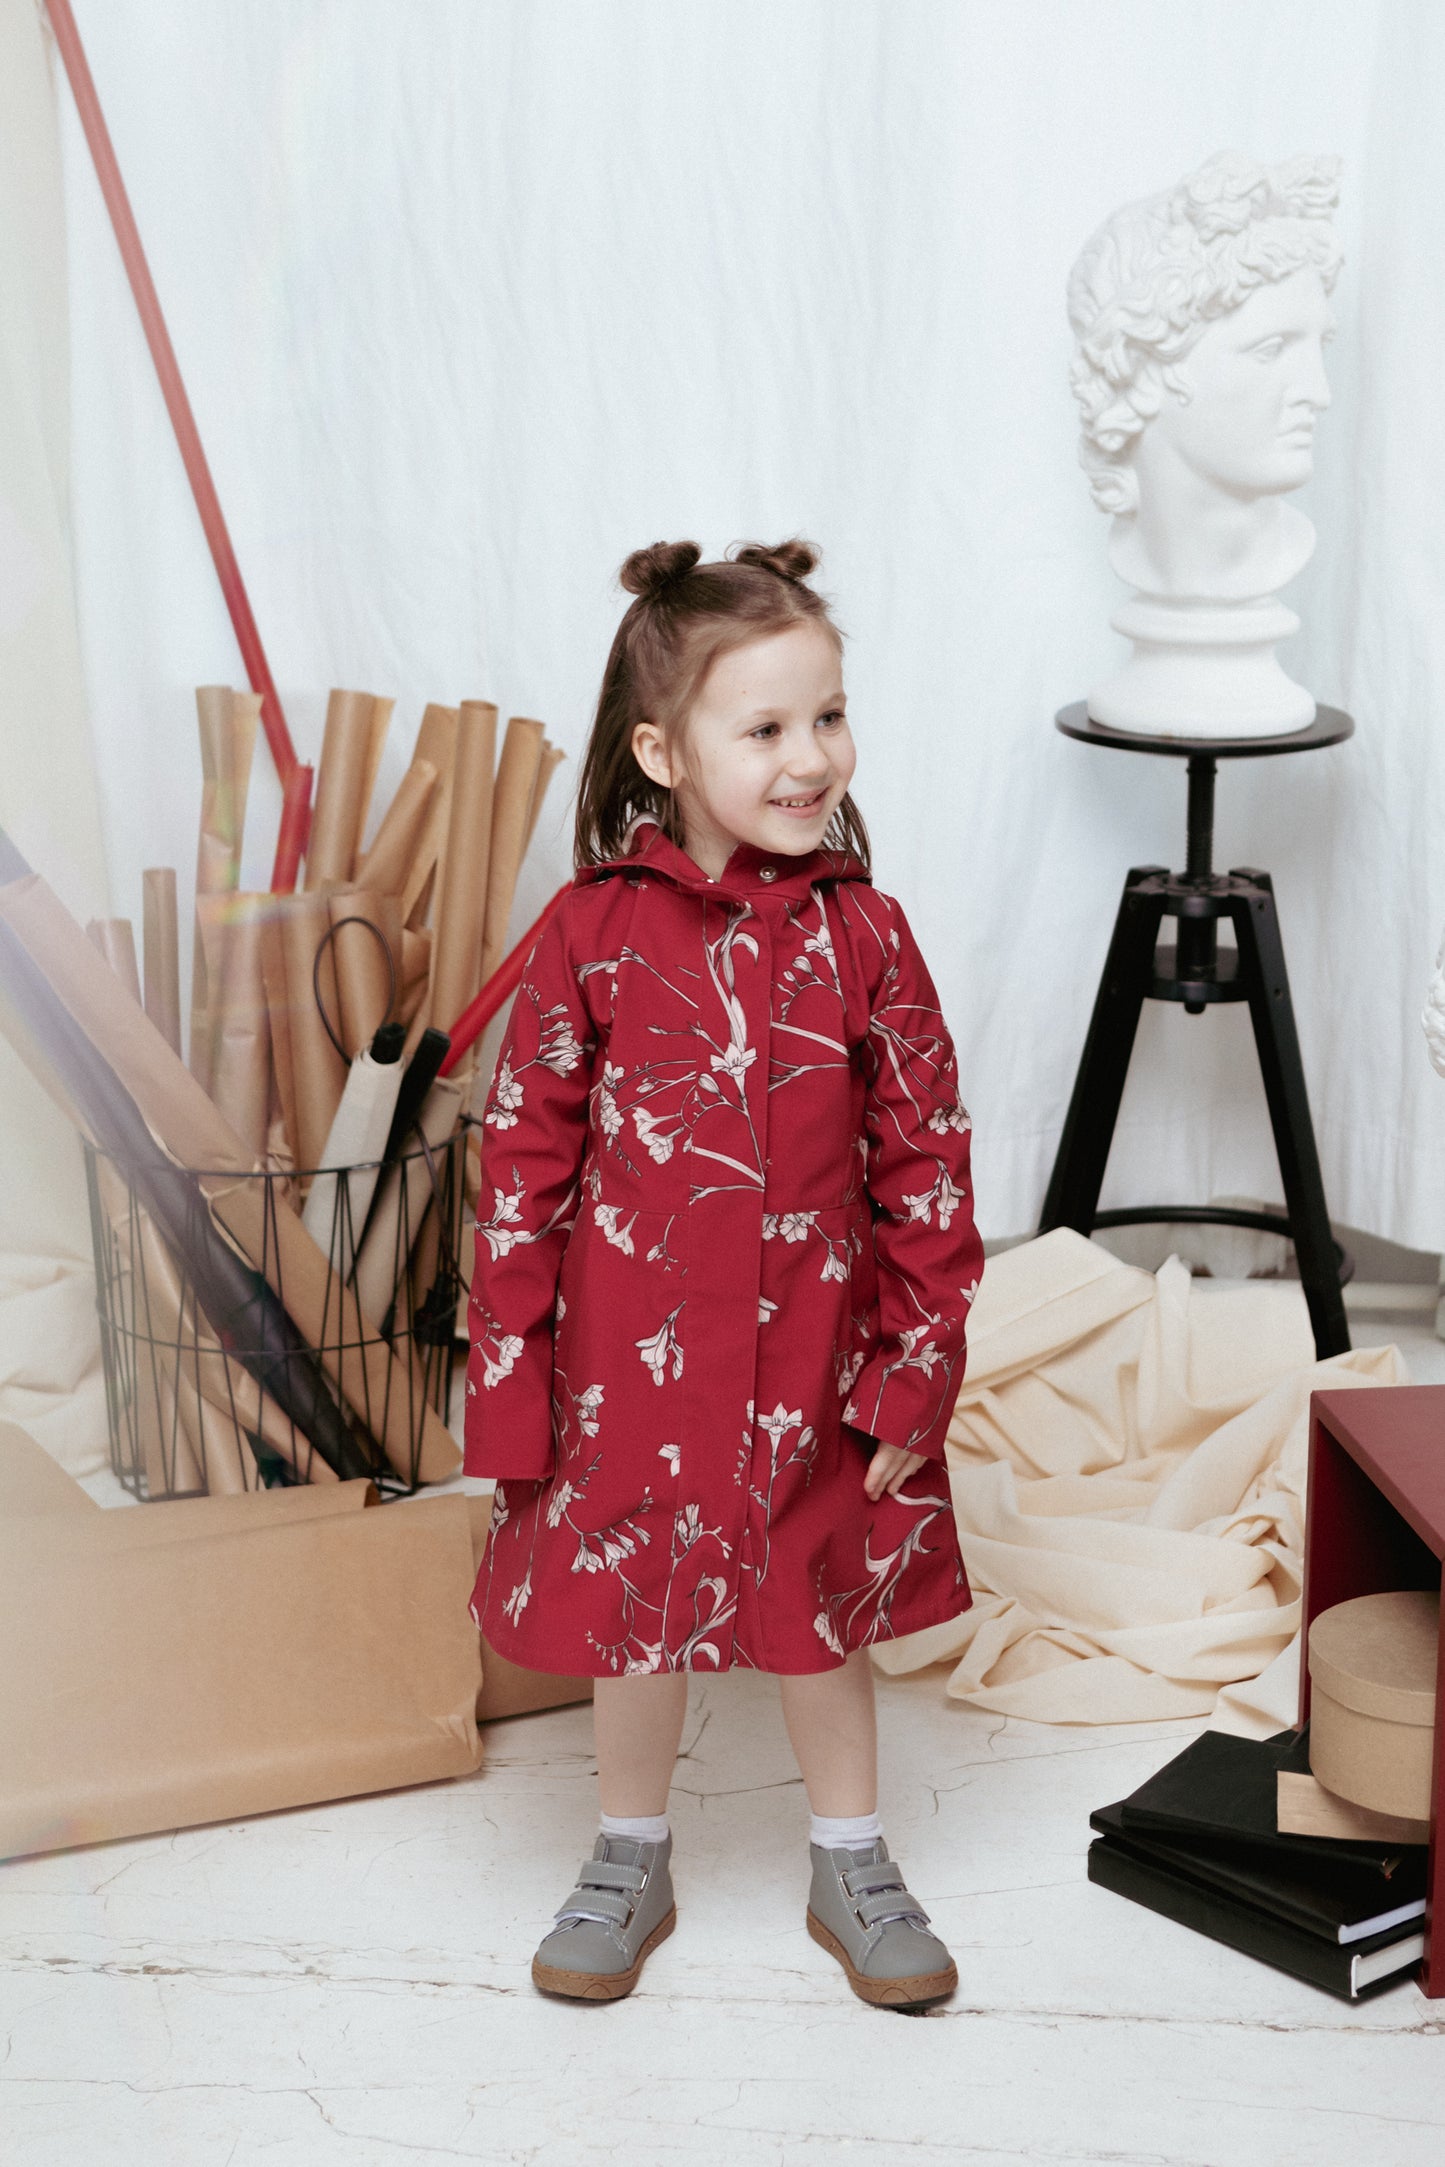 Waterproof Floral Coat with red background and pinkish freesia flower print